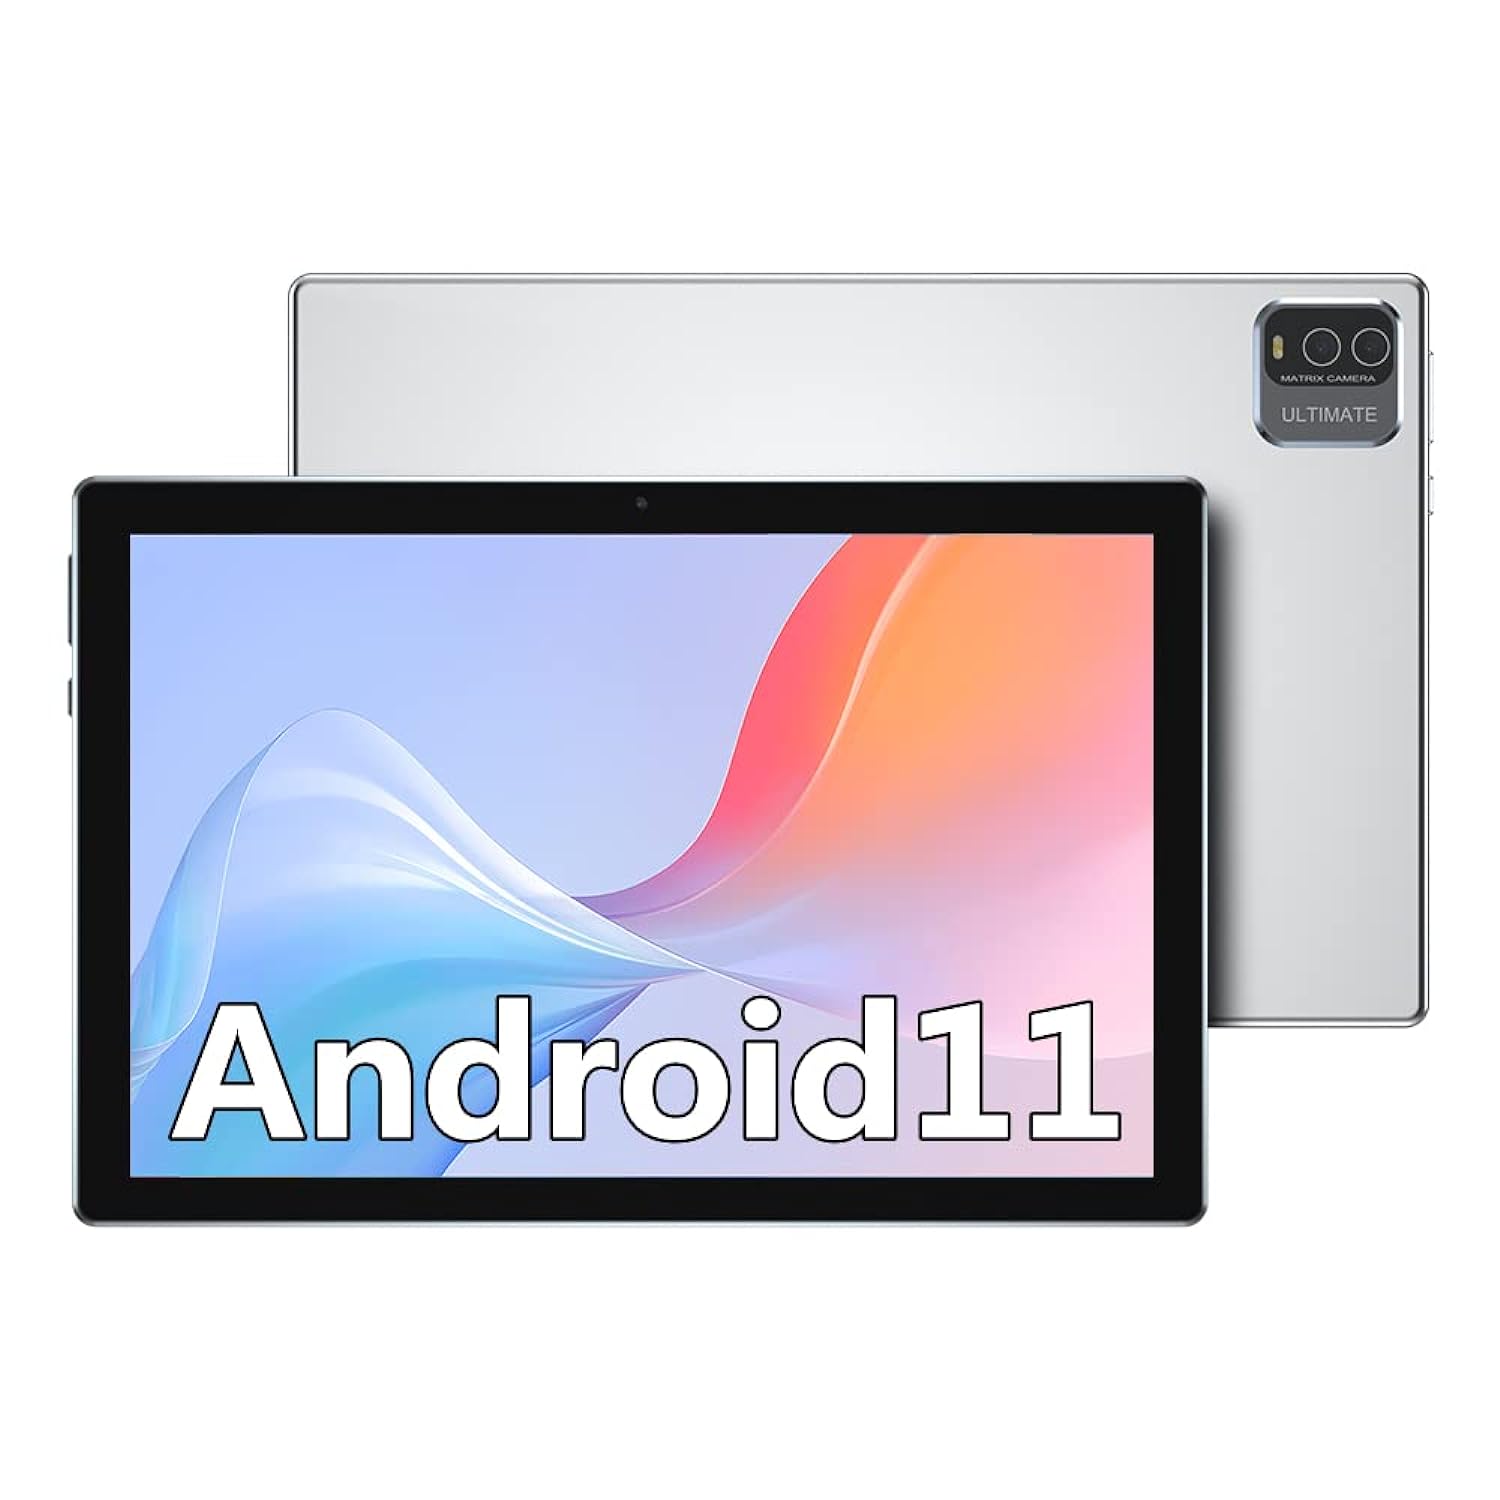 thinkstar Tablet 10 Inch Android Tablets 2Gb+32Gb Quad-Core Tablet Fhd 1280X800 Display Tablet (Silver)